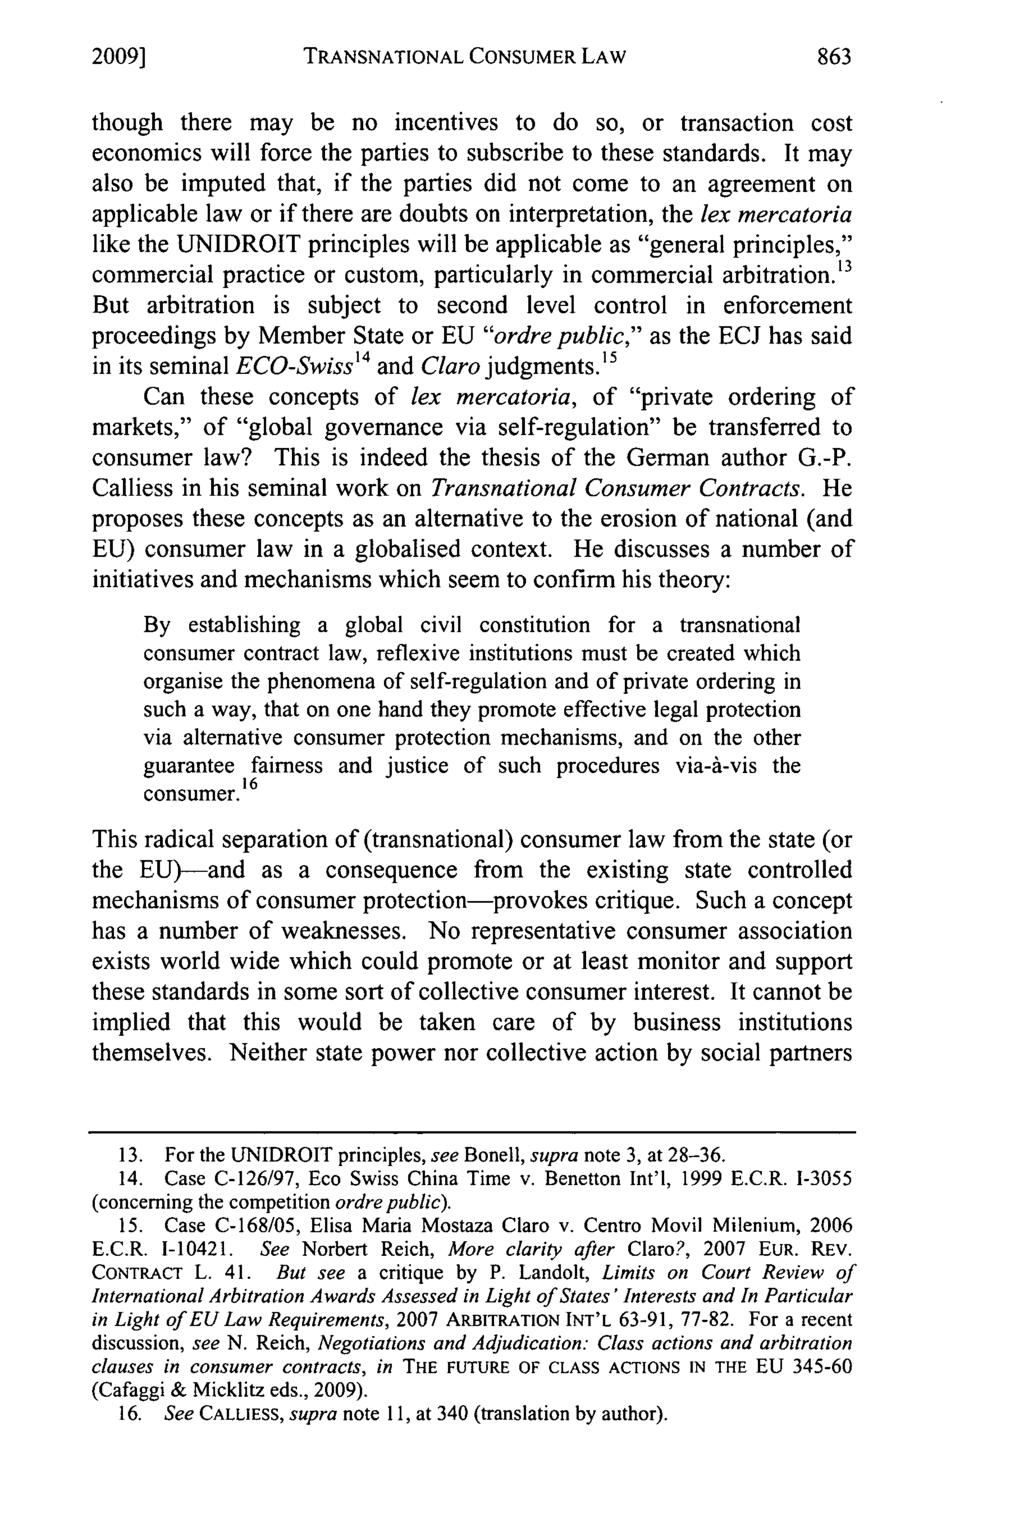 2009] TRANSNATIONAL CONSUMER LAW though there may be no incentives to do so, or transaction cost economics will force the parties to subscribe to these standards.